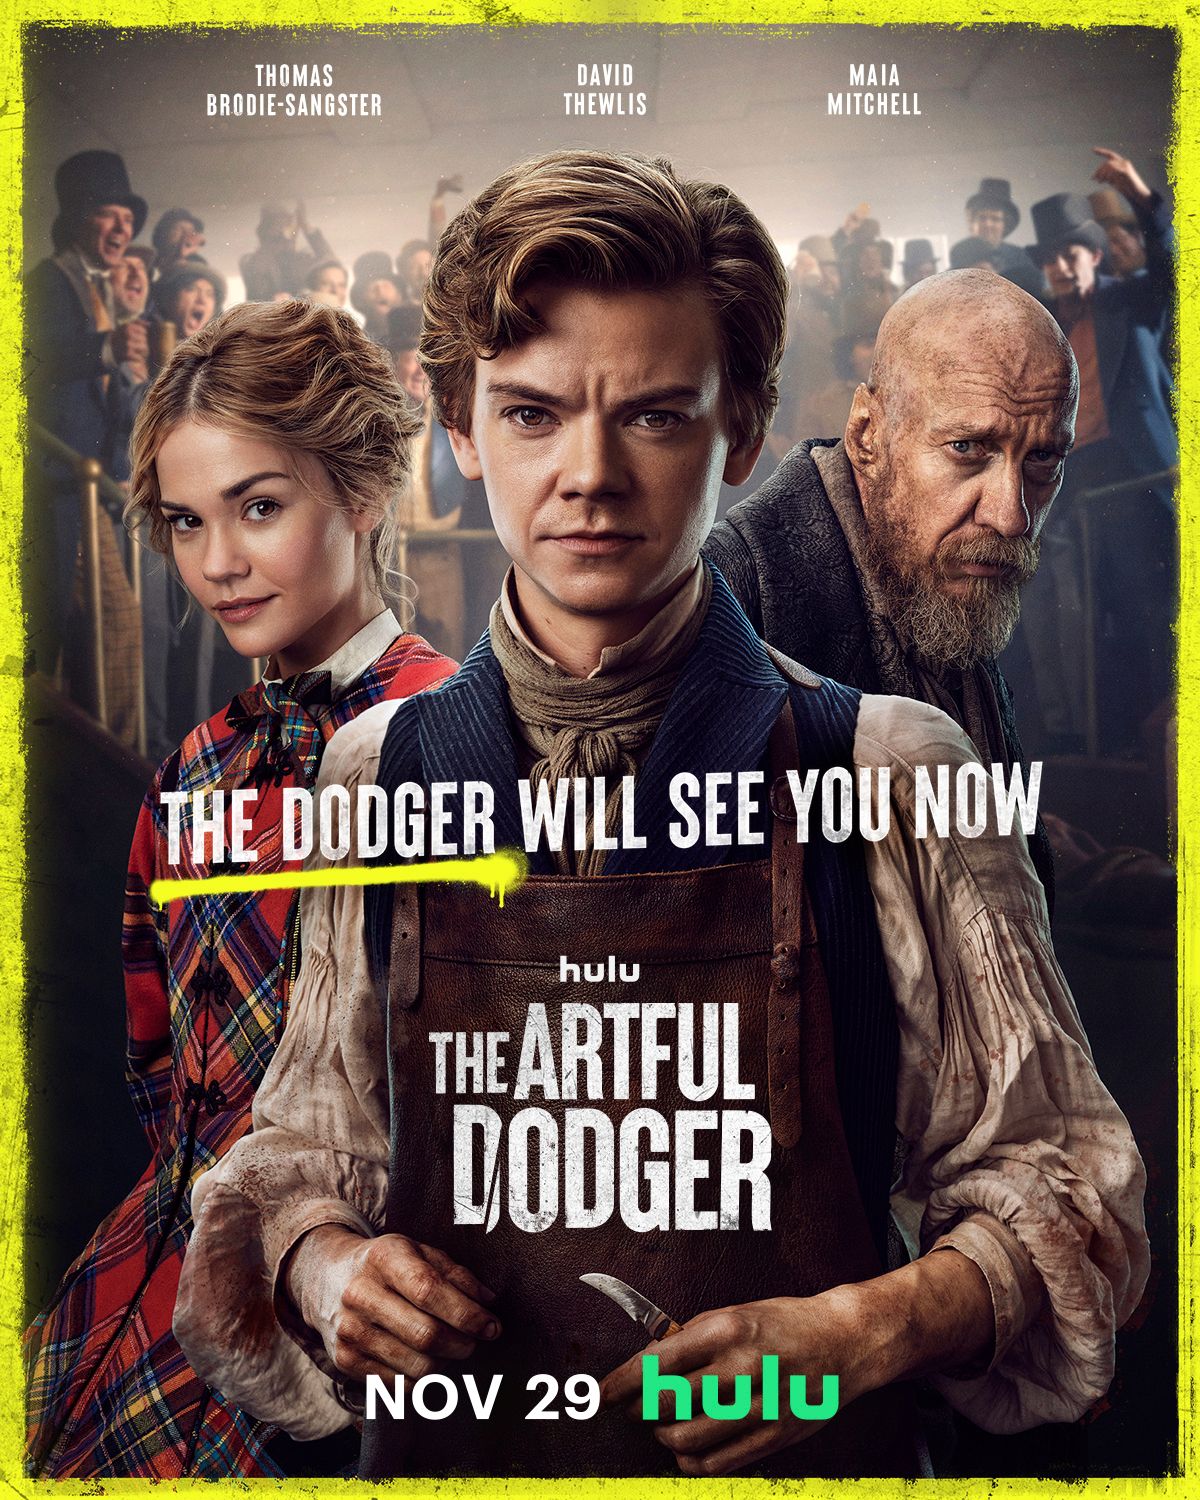 Jack Dawkins, portrayed by Thomas Brodie-Sangster, stands with Fagin (David Thewlis) and Lady Belle Fox (Maia Mitchell) in 'The Artful Dodger' poster.